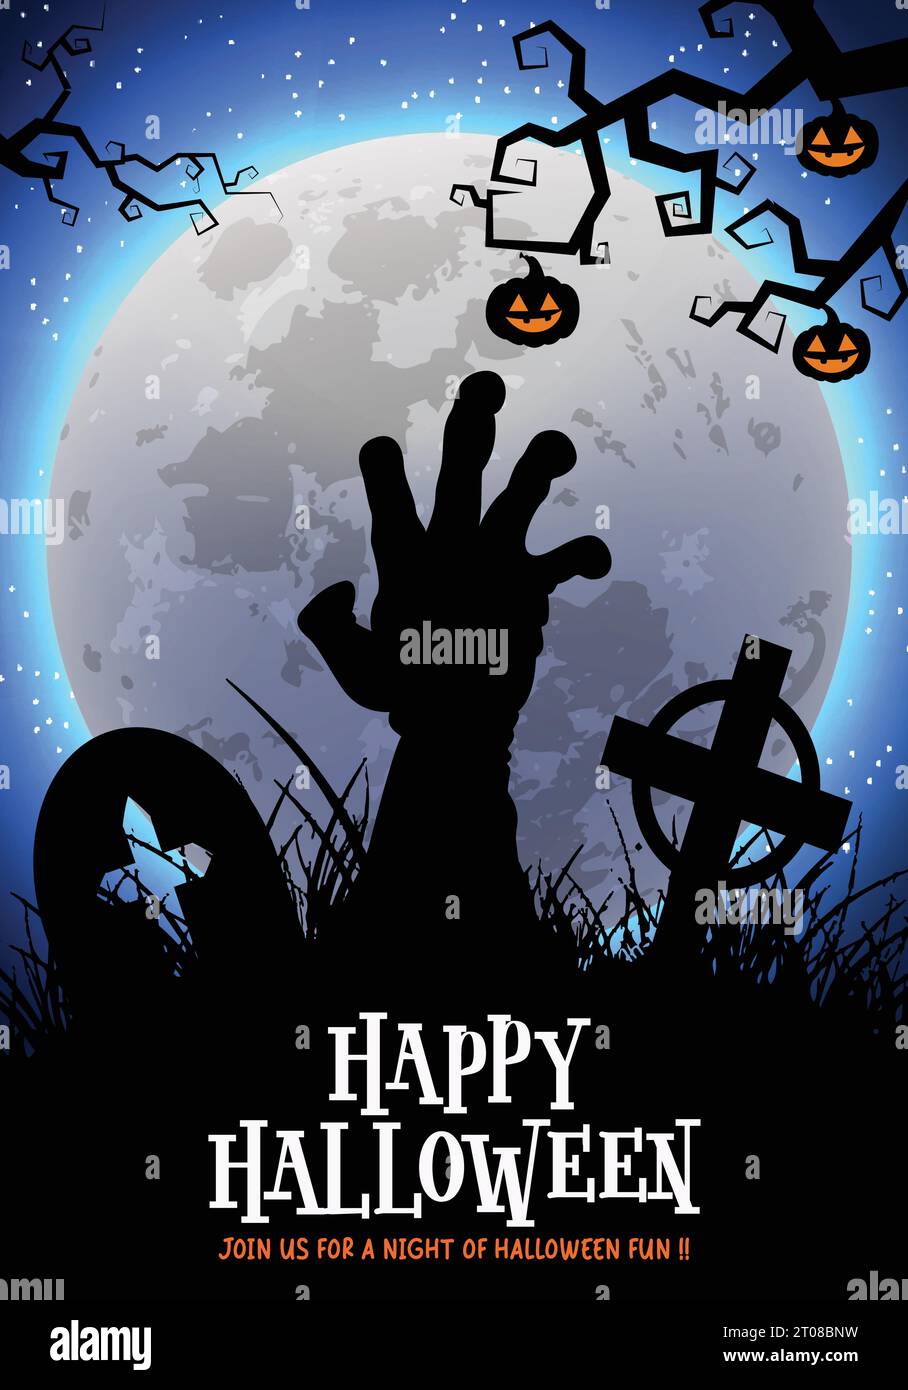 Happy halloween text vector poster design. Halloween greeting card with dead zombie hand in creepy, scary and horror silhouette grave yard background. Stock Vector